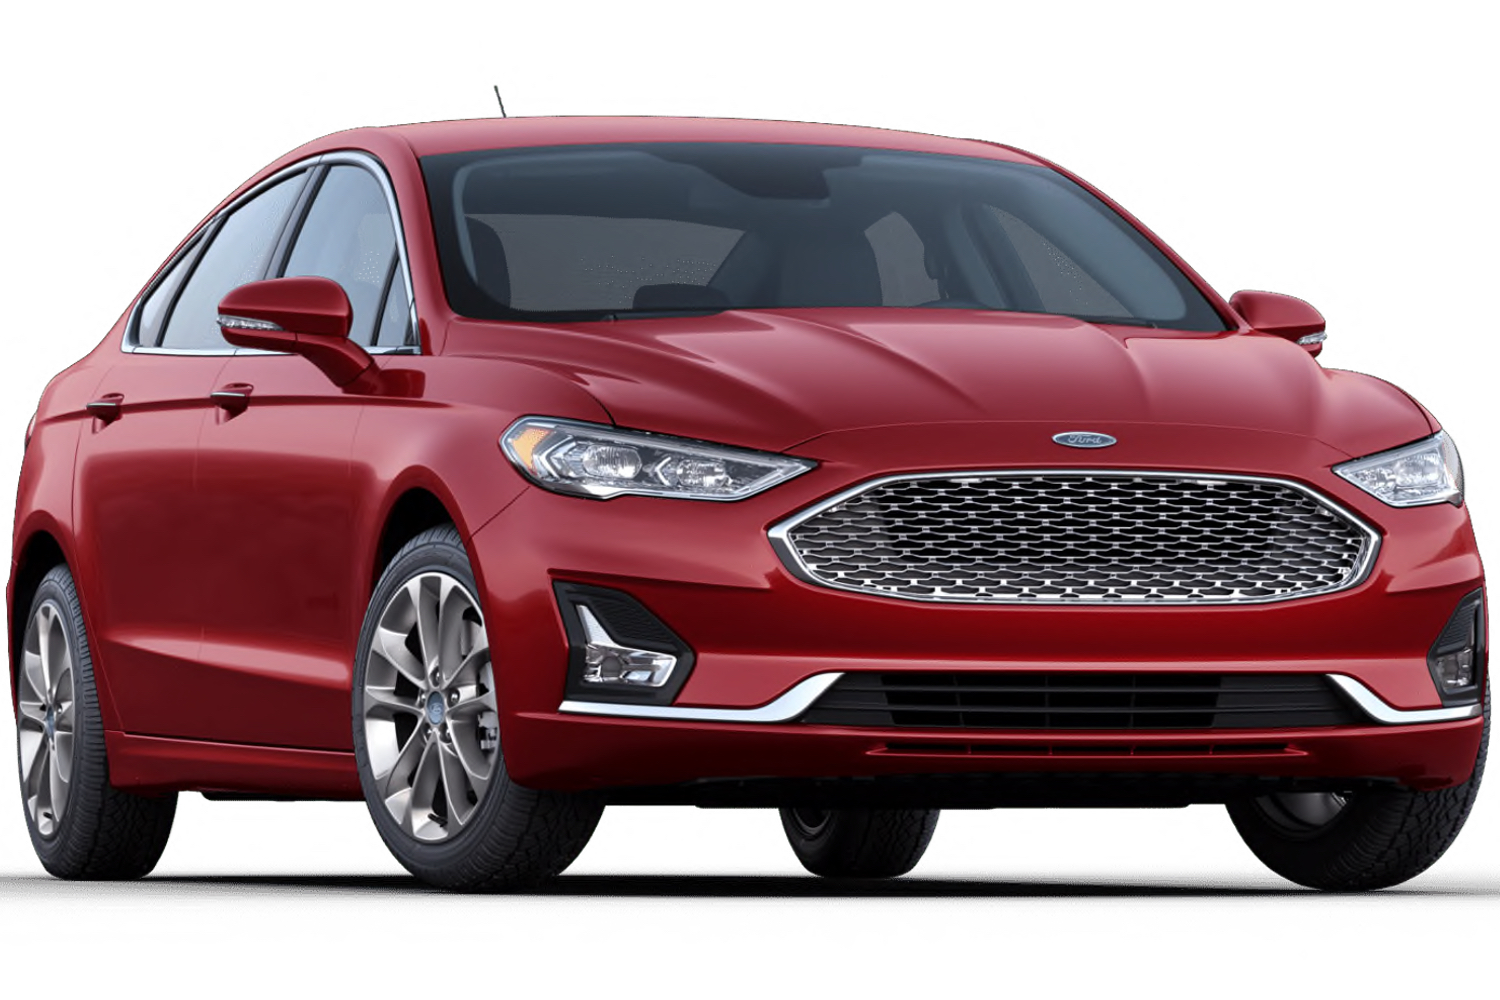 2020 Ford Fusion Gets New Rapid Red Metallic Color: First Look